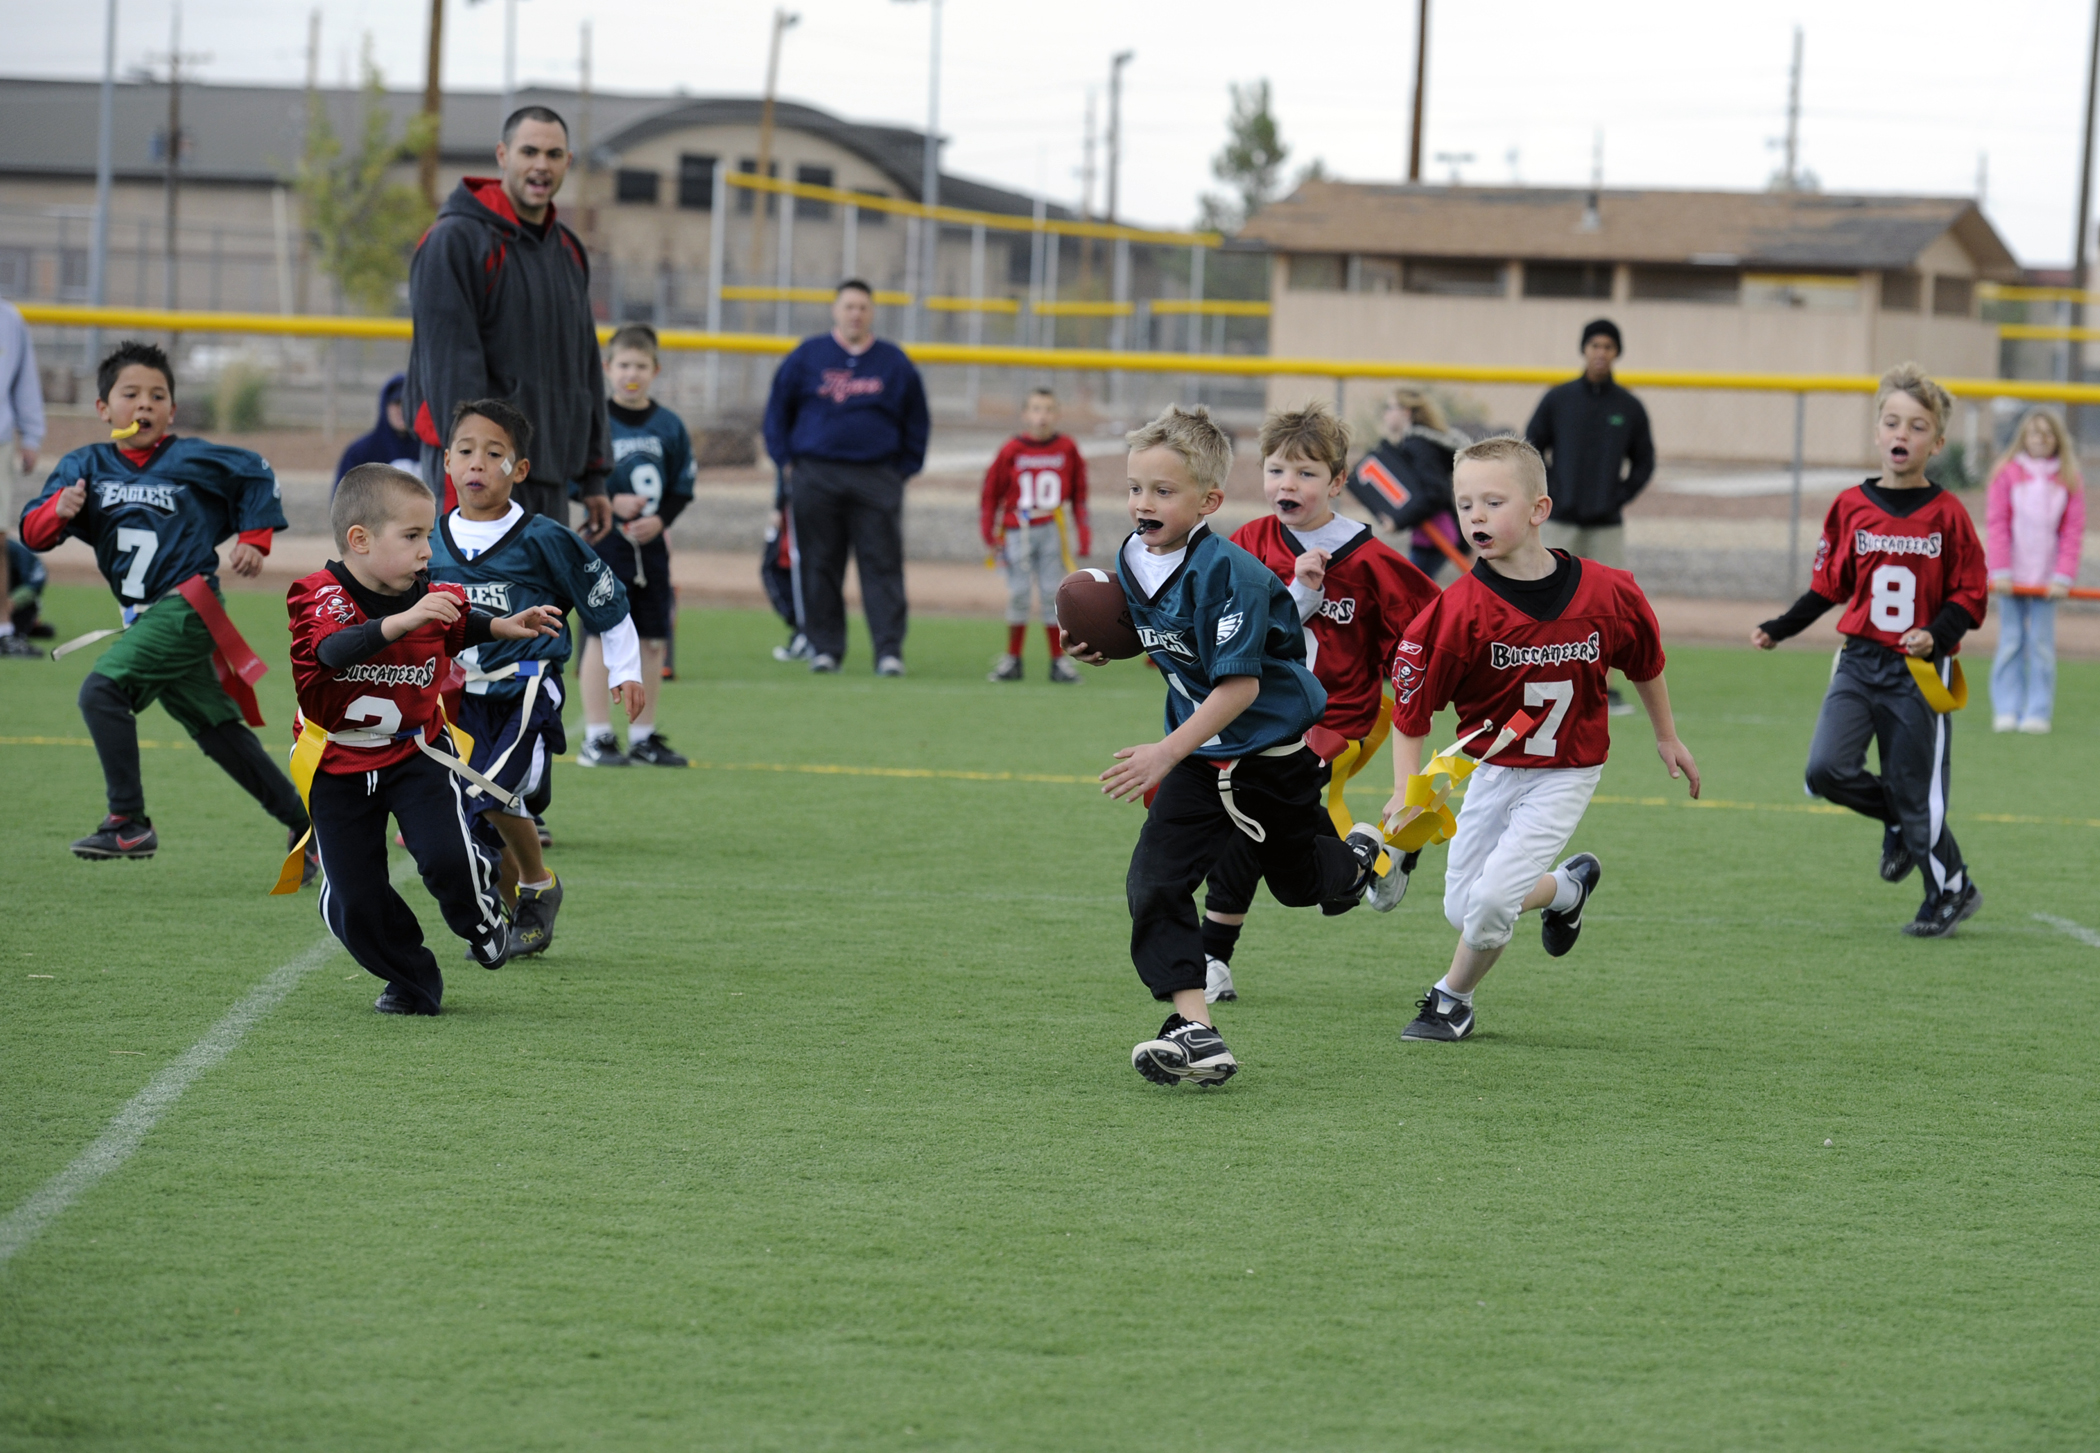 5 On 5 Youth Flag Football Rules